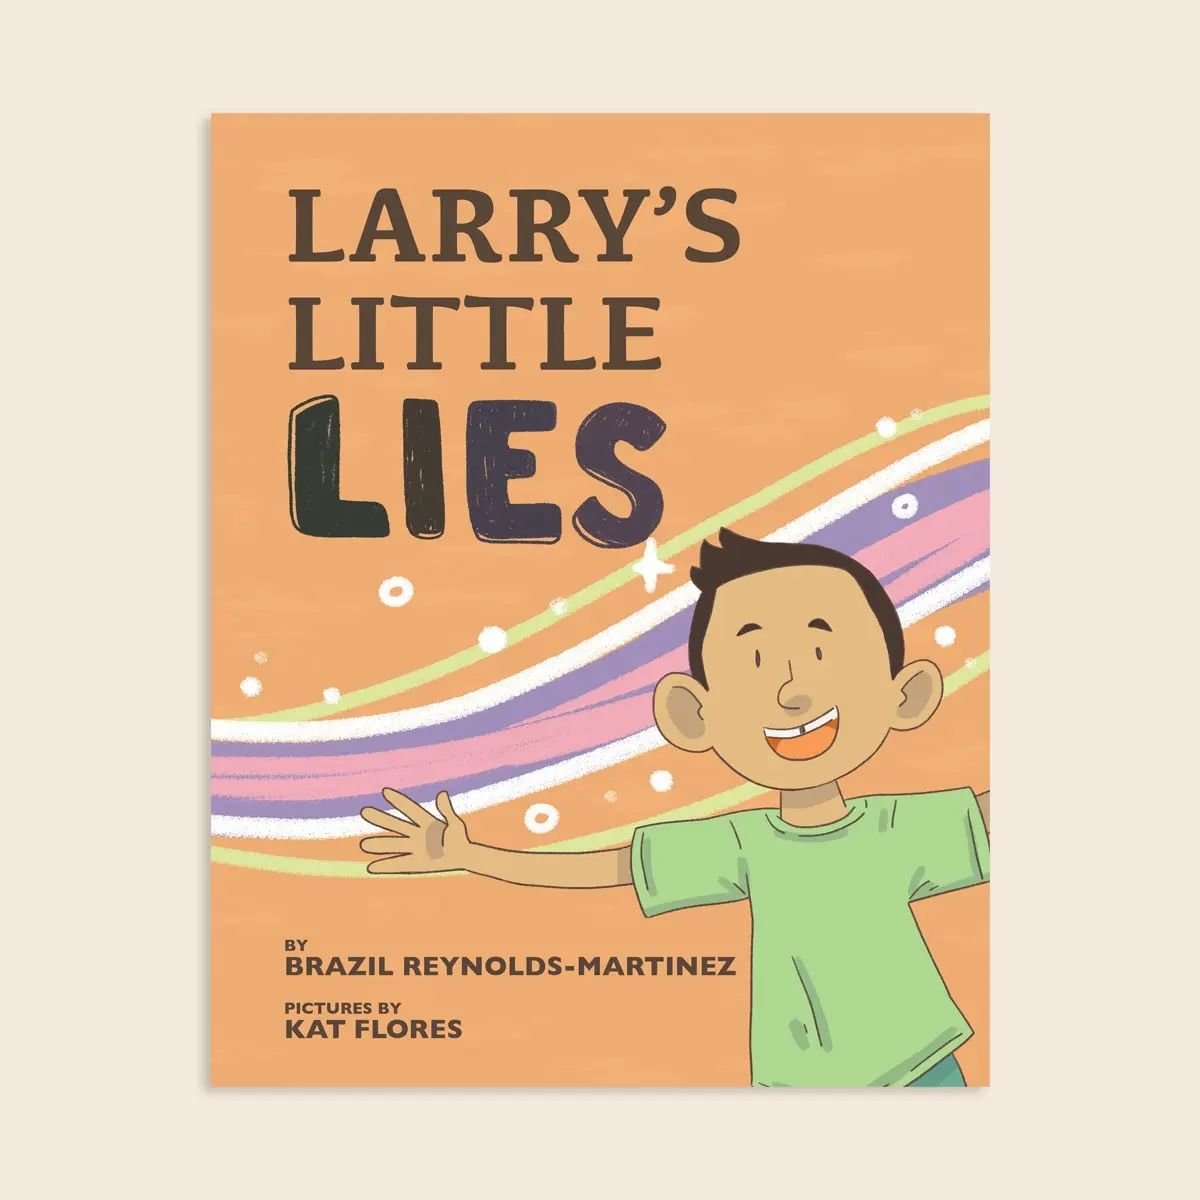 Happy pub day to Larry's Little Lies! Our second book is out now! It was great to visually translate Larry's imagination. Thank you so much to Brazil for working with me again, I'm very grateful for this opportunity. Larry's Little Lies written by Br